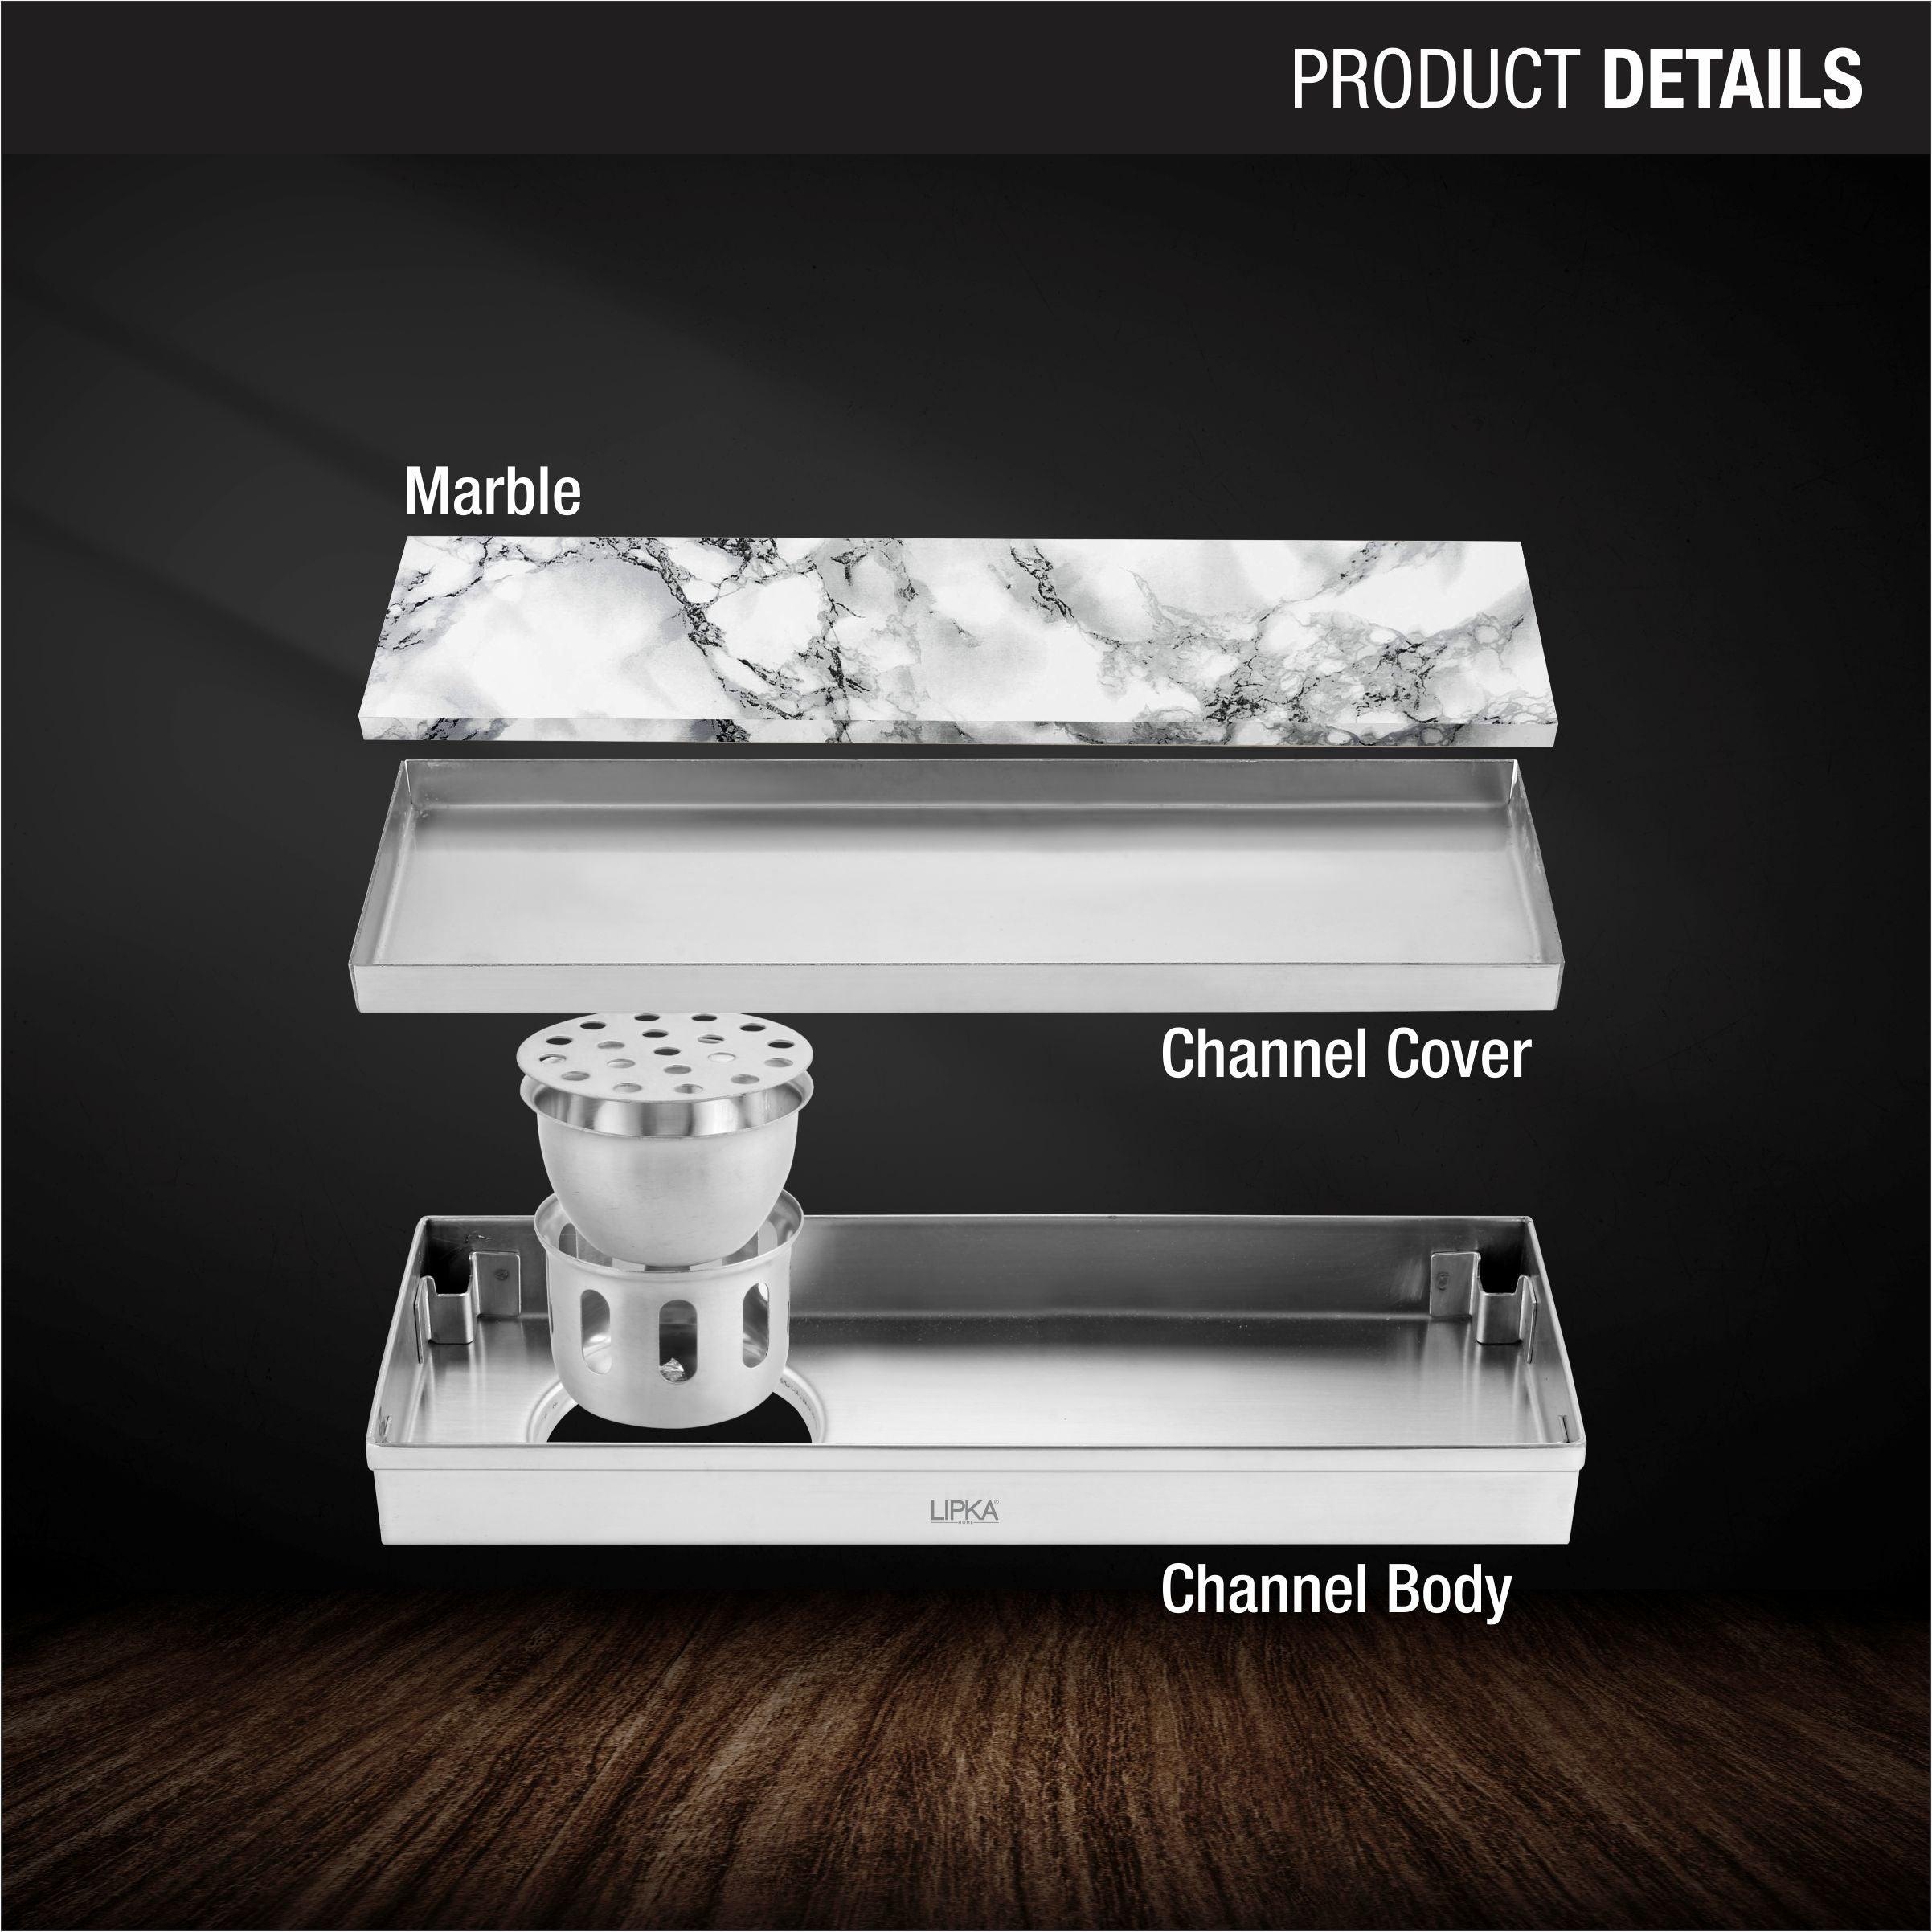 Marble Insert Shower Drain Channel (18 x 5 Inches) product details